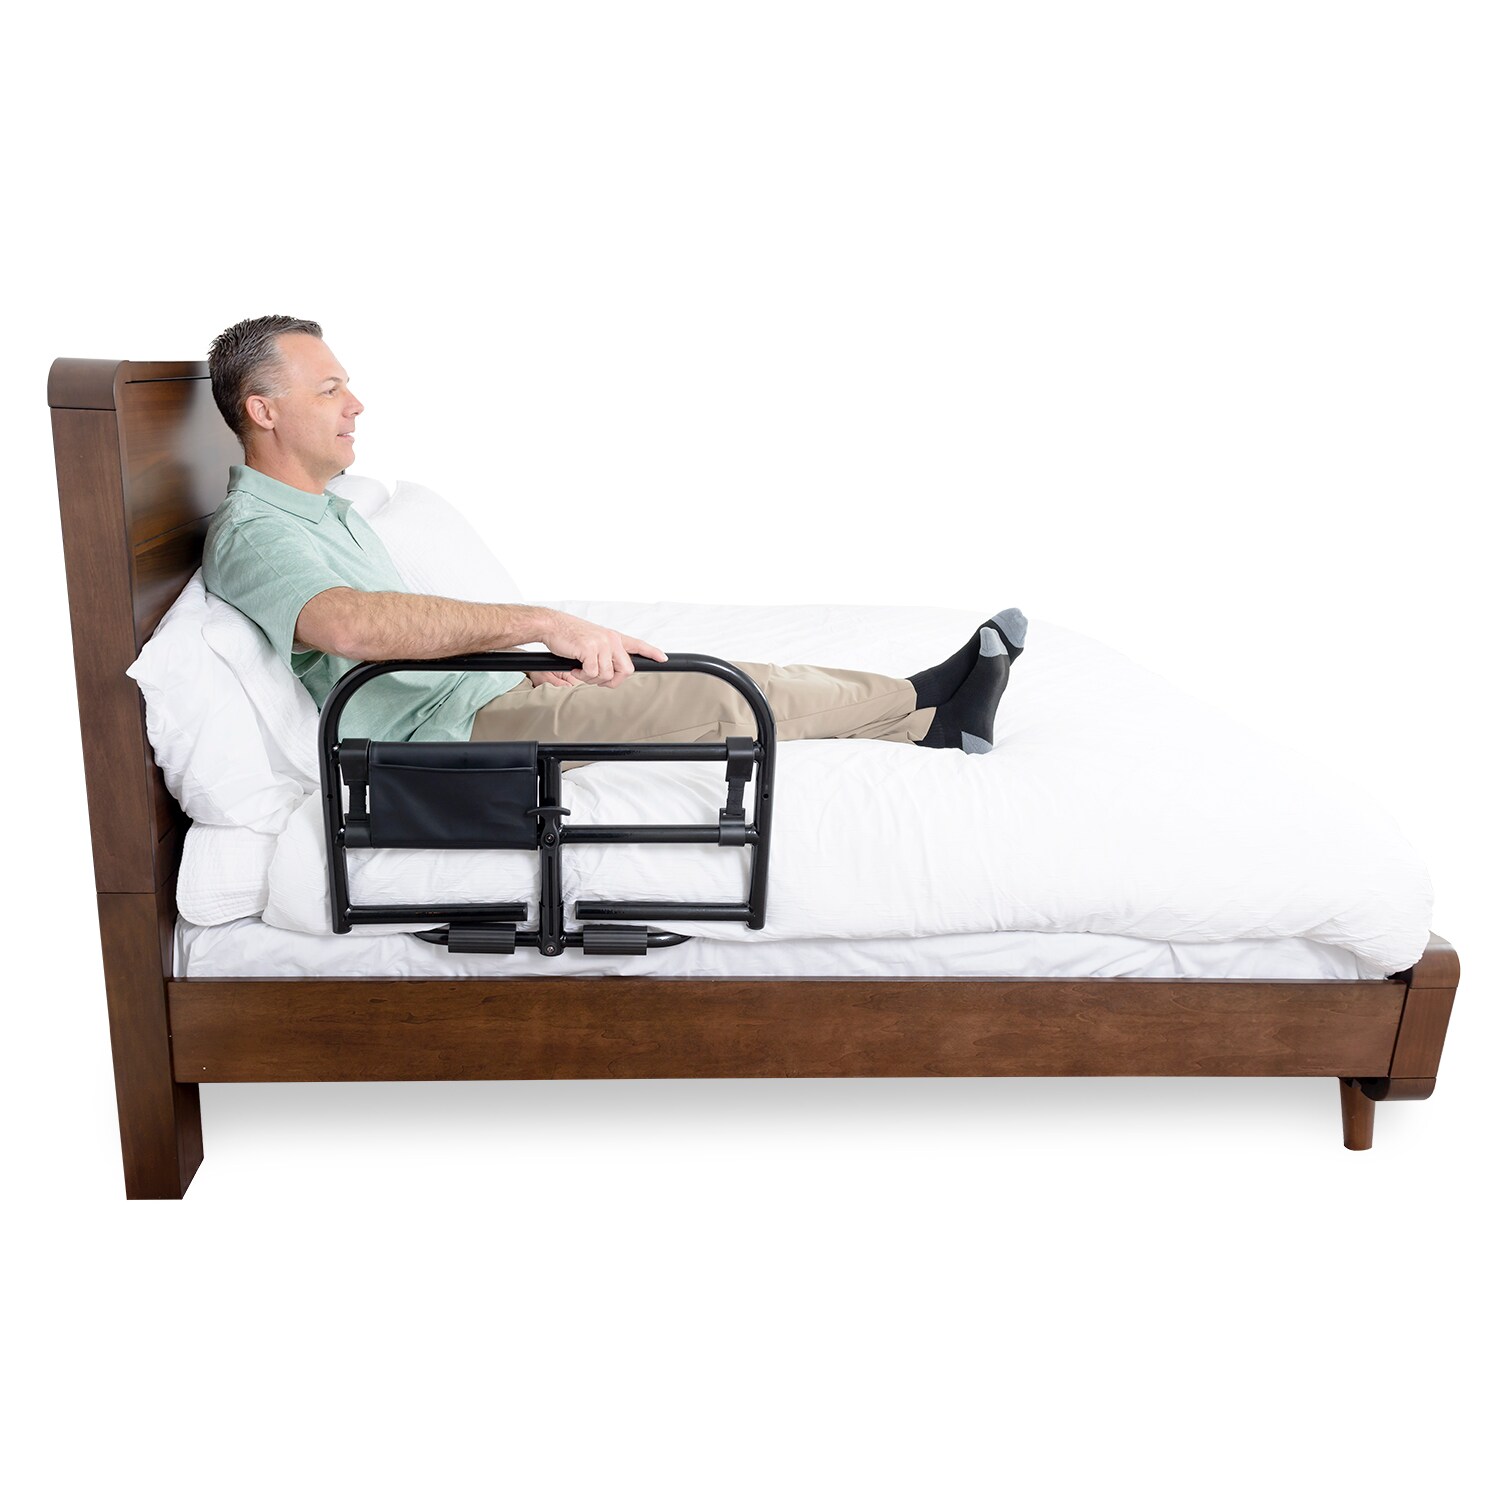 Bed Rails at